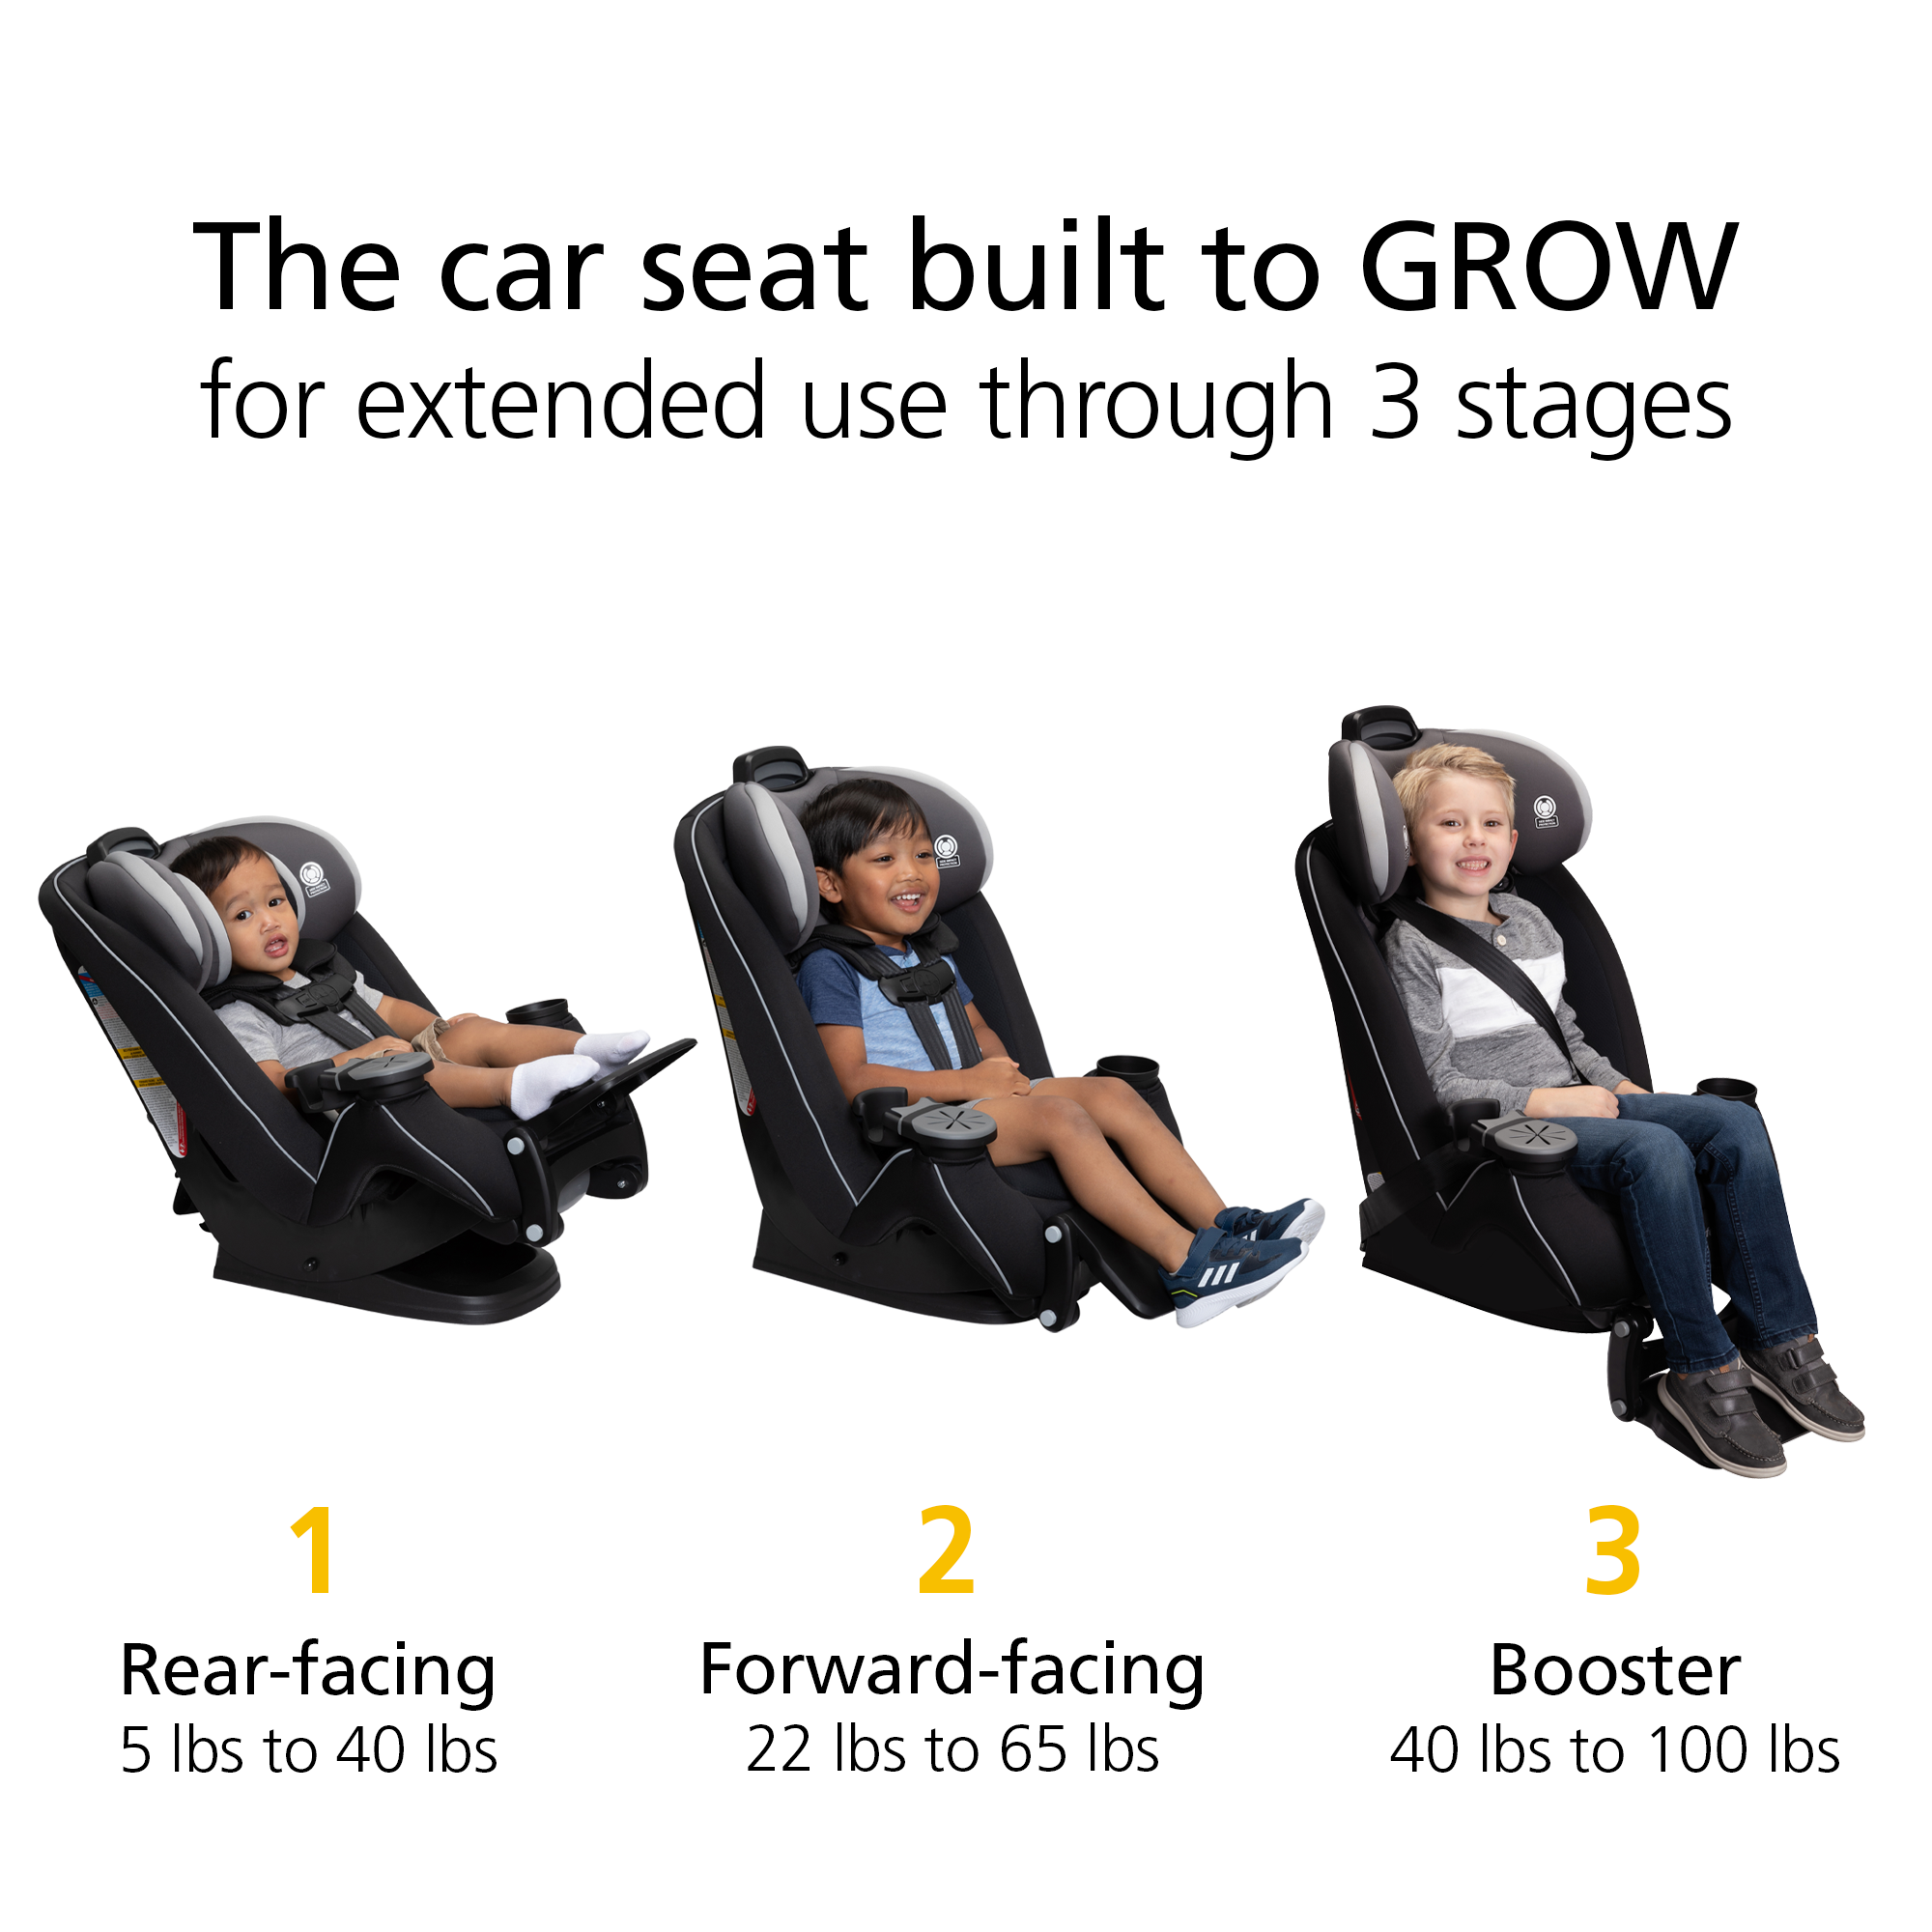 Grow and Go™ Extend 'n Ride LX - Up to 7" of additional leg room in rear-facing mode